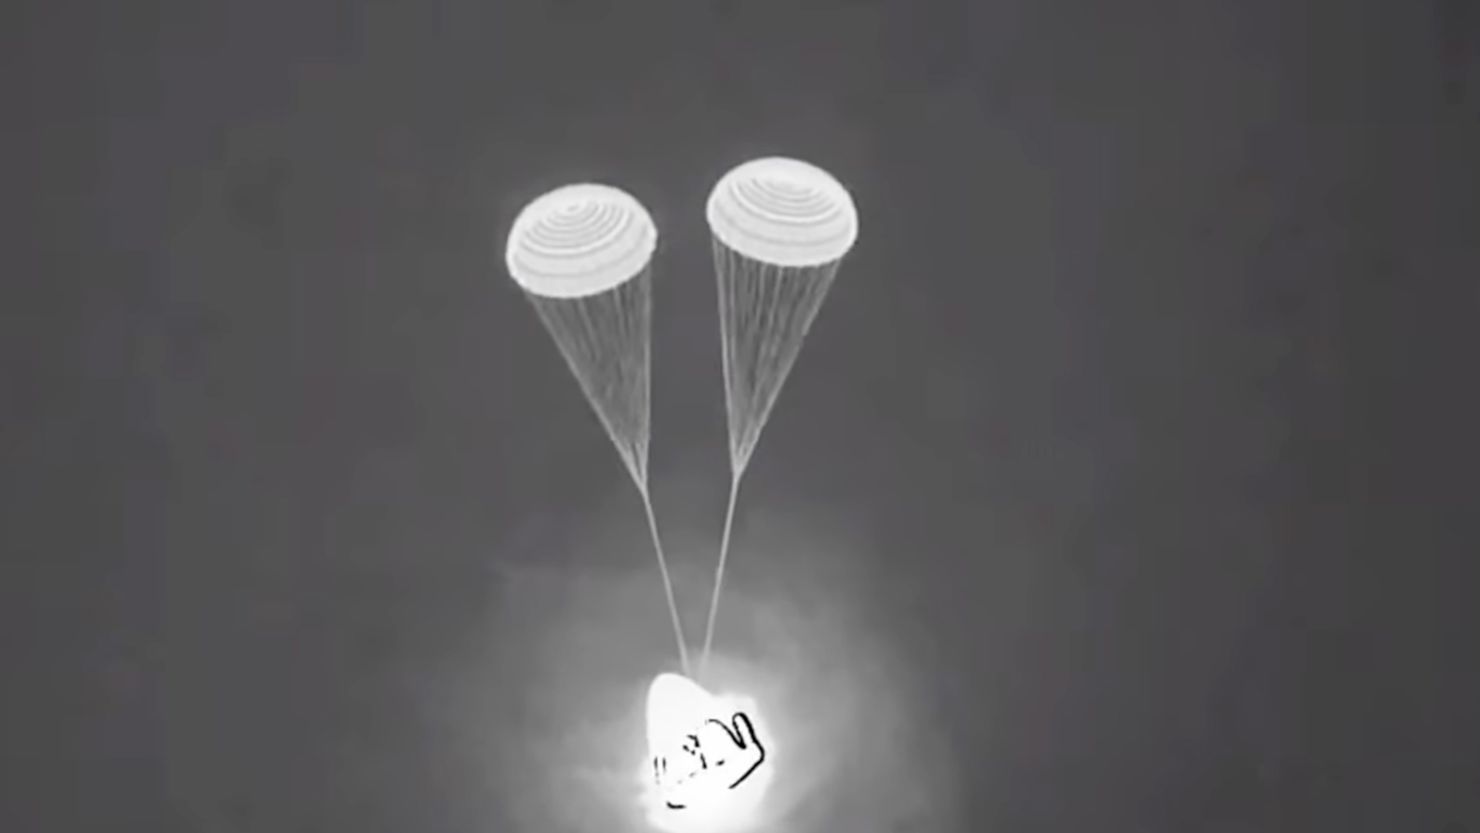 The SpaceX Crew Dragon capsule deployed parachutes to slow its descent before splashing down off the coast of Florida on Monday.